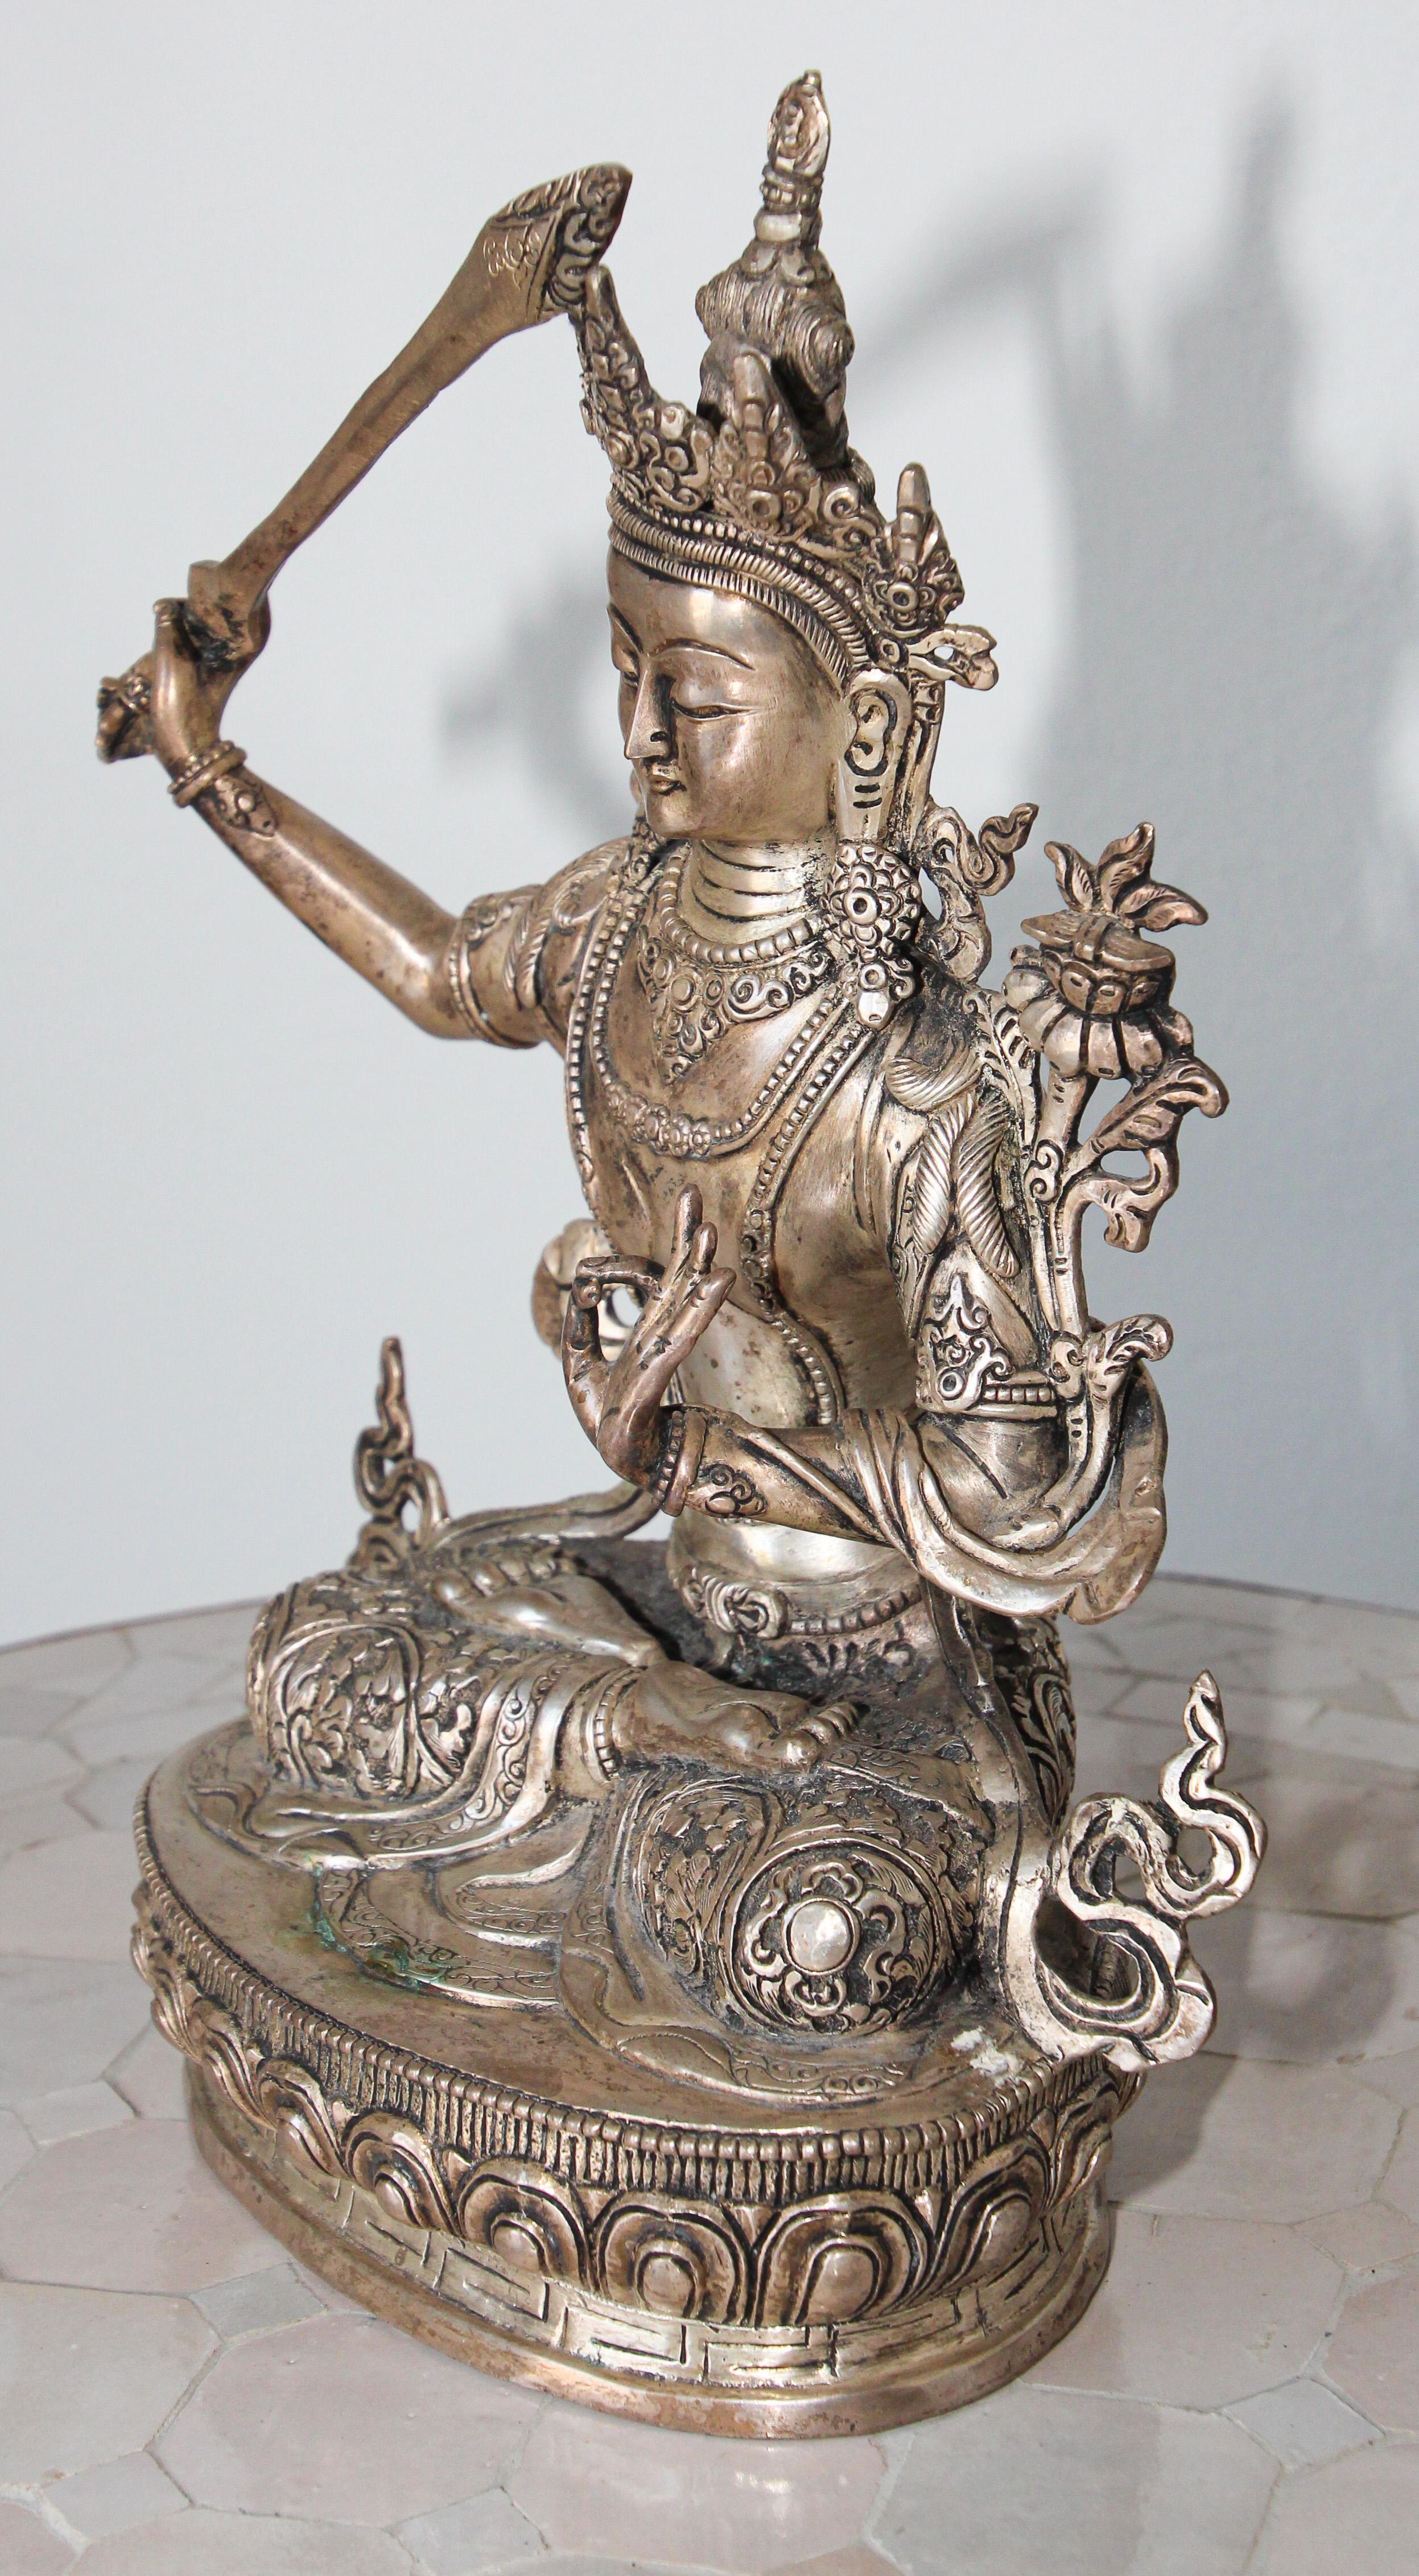 A silvered figure of Manjusri seated in dhyanasana on a Pala style Indian base, wearing an ornate crown and wearing body jewelry,
Manjushri holds the sword of wisdom in his right hand and above his left shoulder is a lotus flower upon which rests a